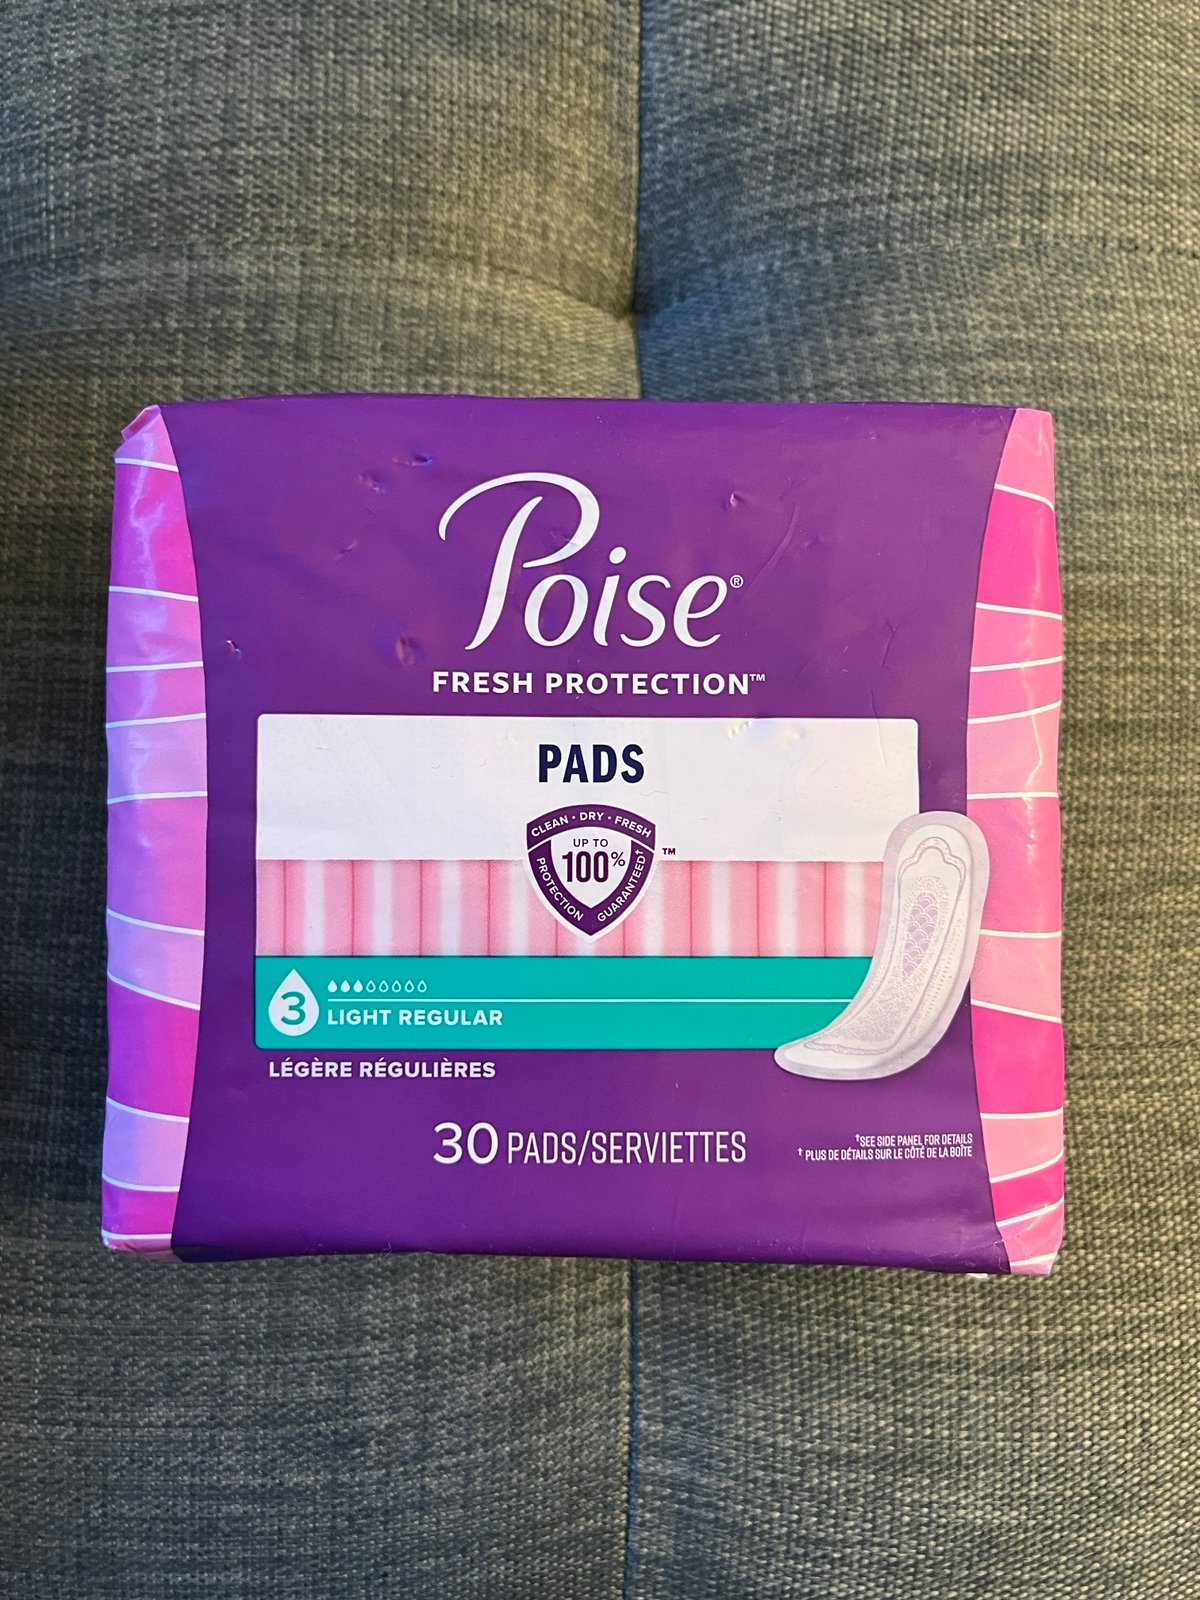 6 x Poise Pads 3 Drops Light Regular, 30 pads (180 pads total) 12ty07q0S